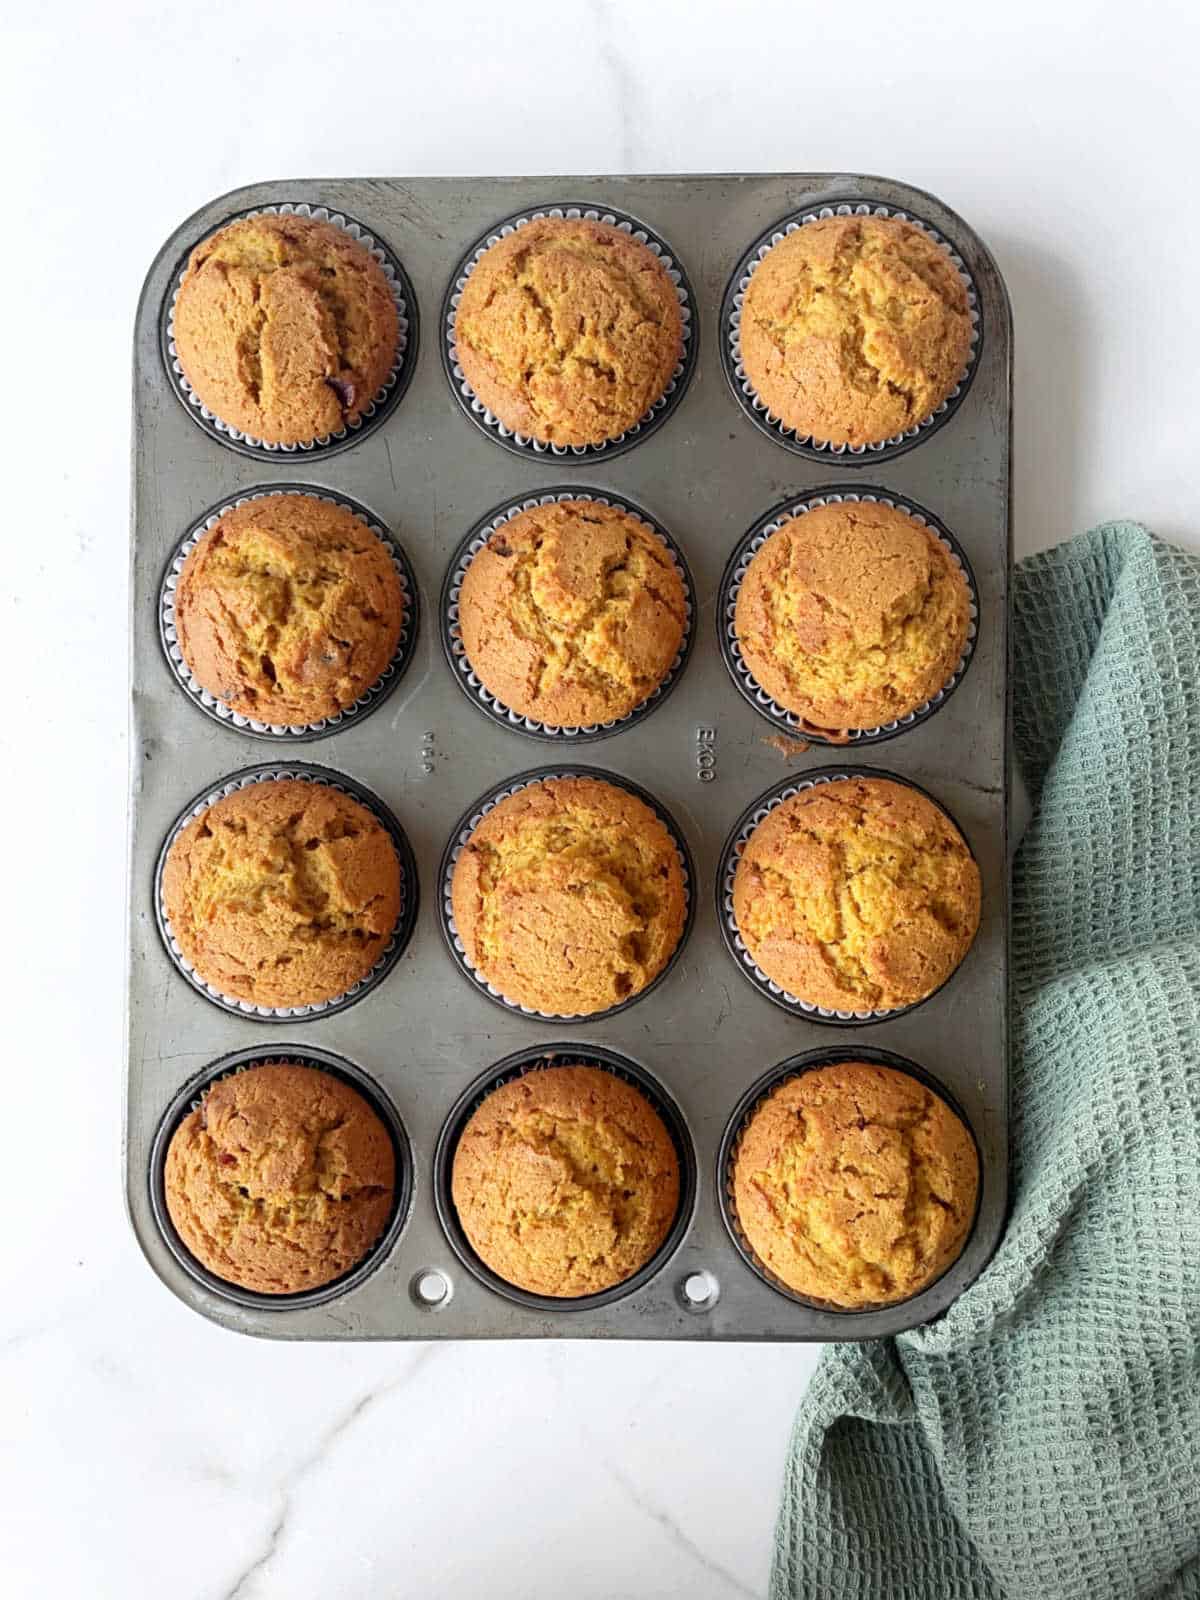 Baked pumpkin muffins in the metal pan on a white surface with a green kitchen towel.